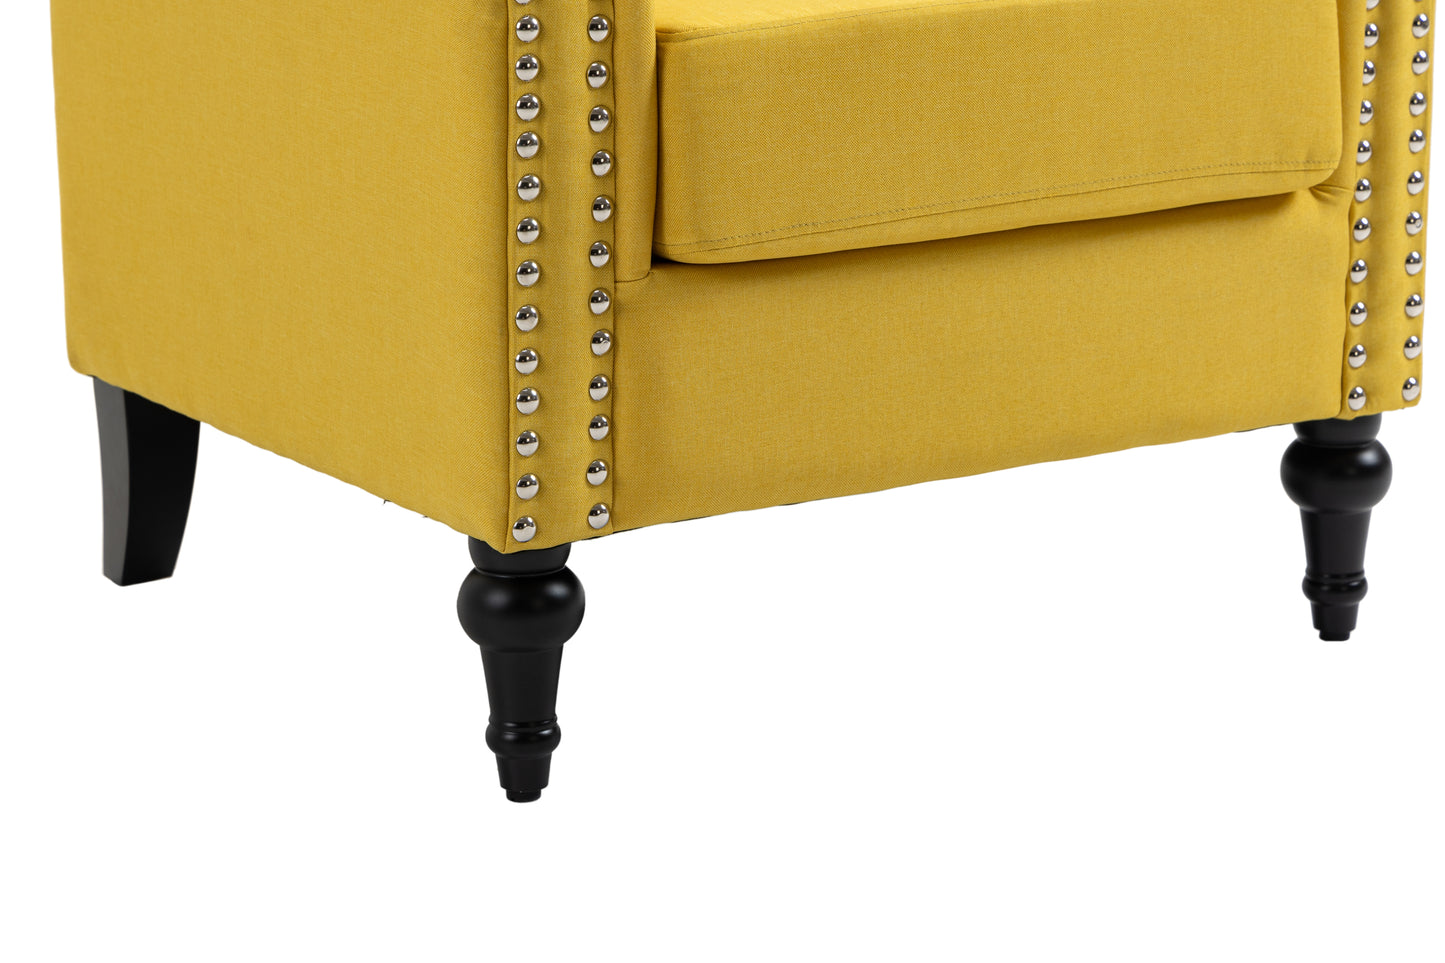 Mid-Century Modern Accent Chair, Linen Armchair w/Tufted Back/Wood Legs, Upholstered Lounge Arm Chair Single Sofa for Living Room Bedroom, YELLOW